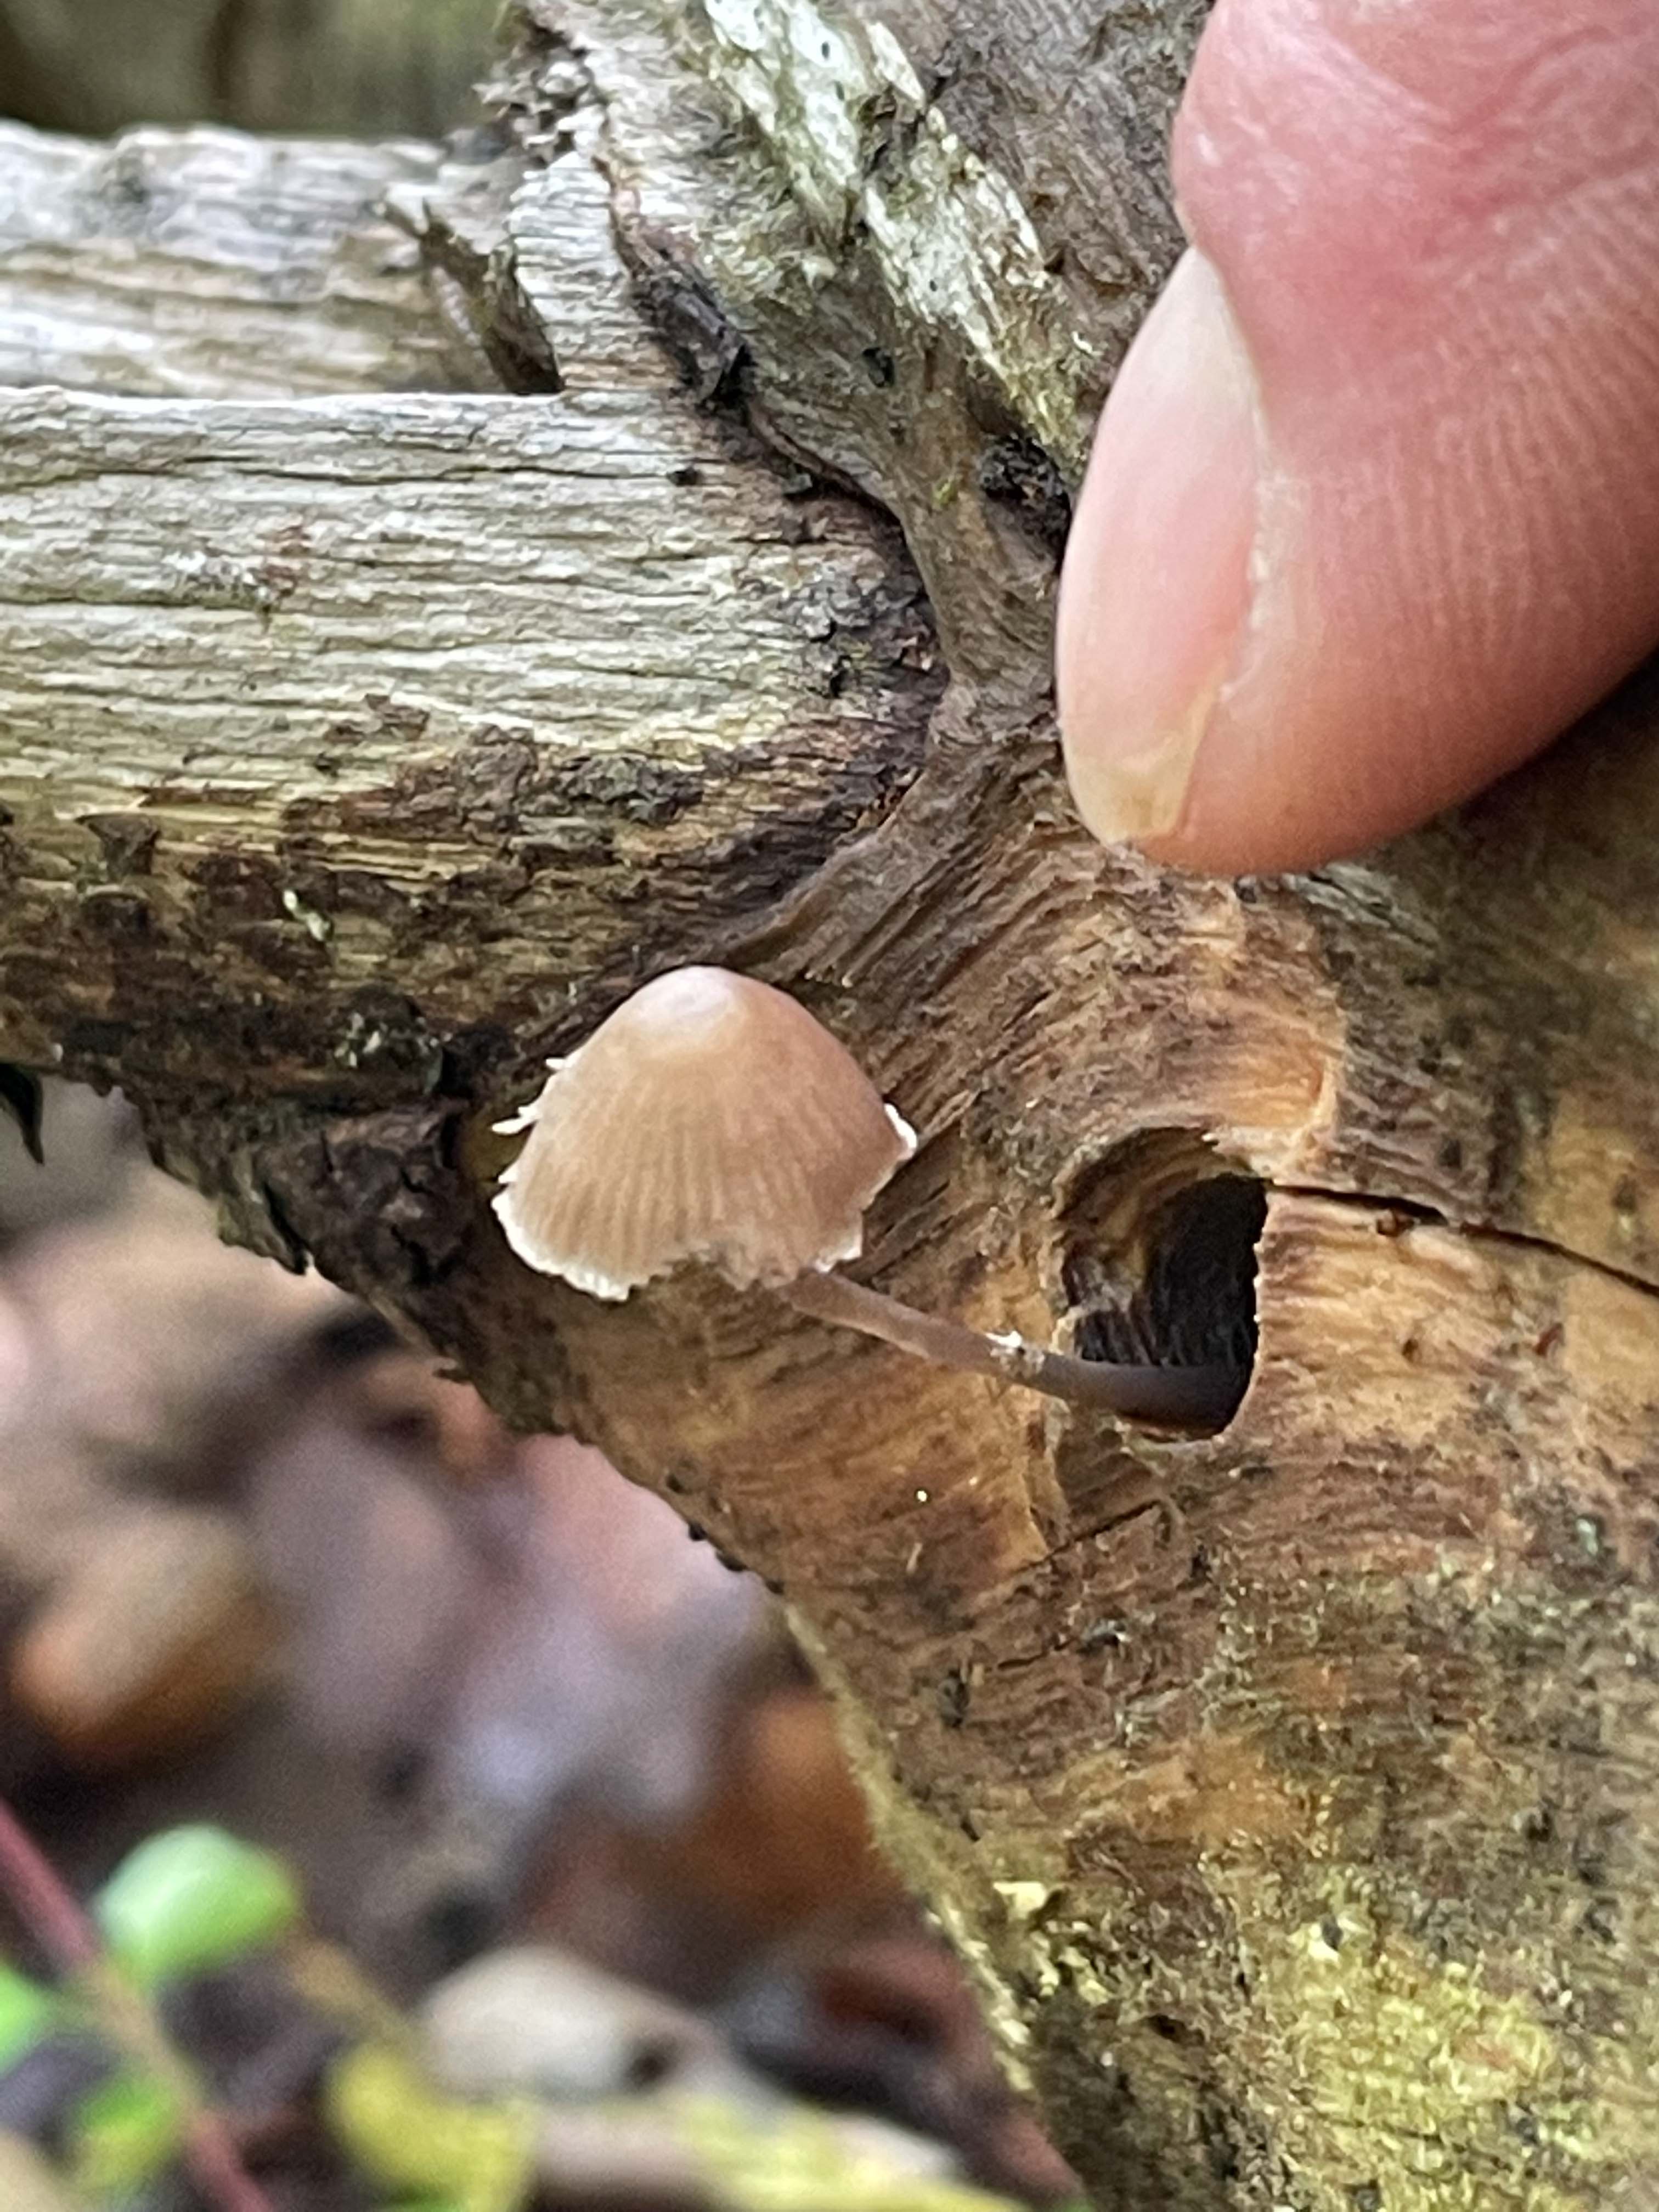 Tiny mushroom (Hard working finger for size reference!).